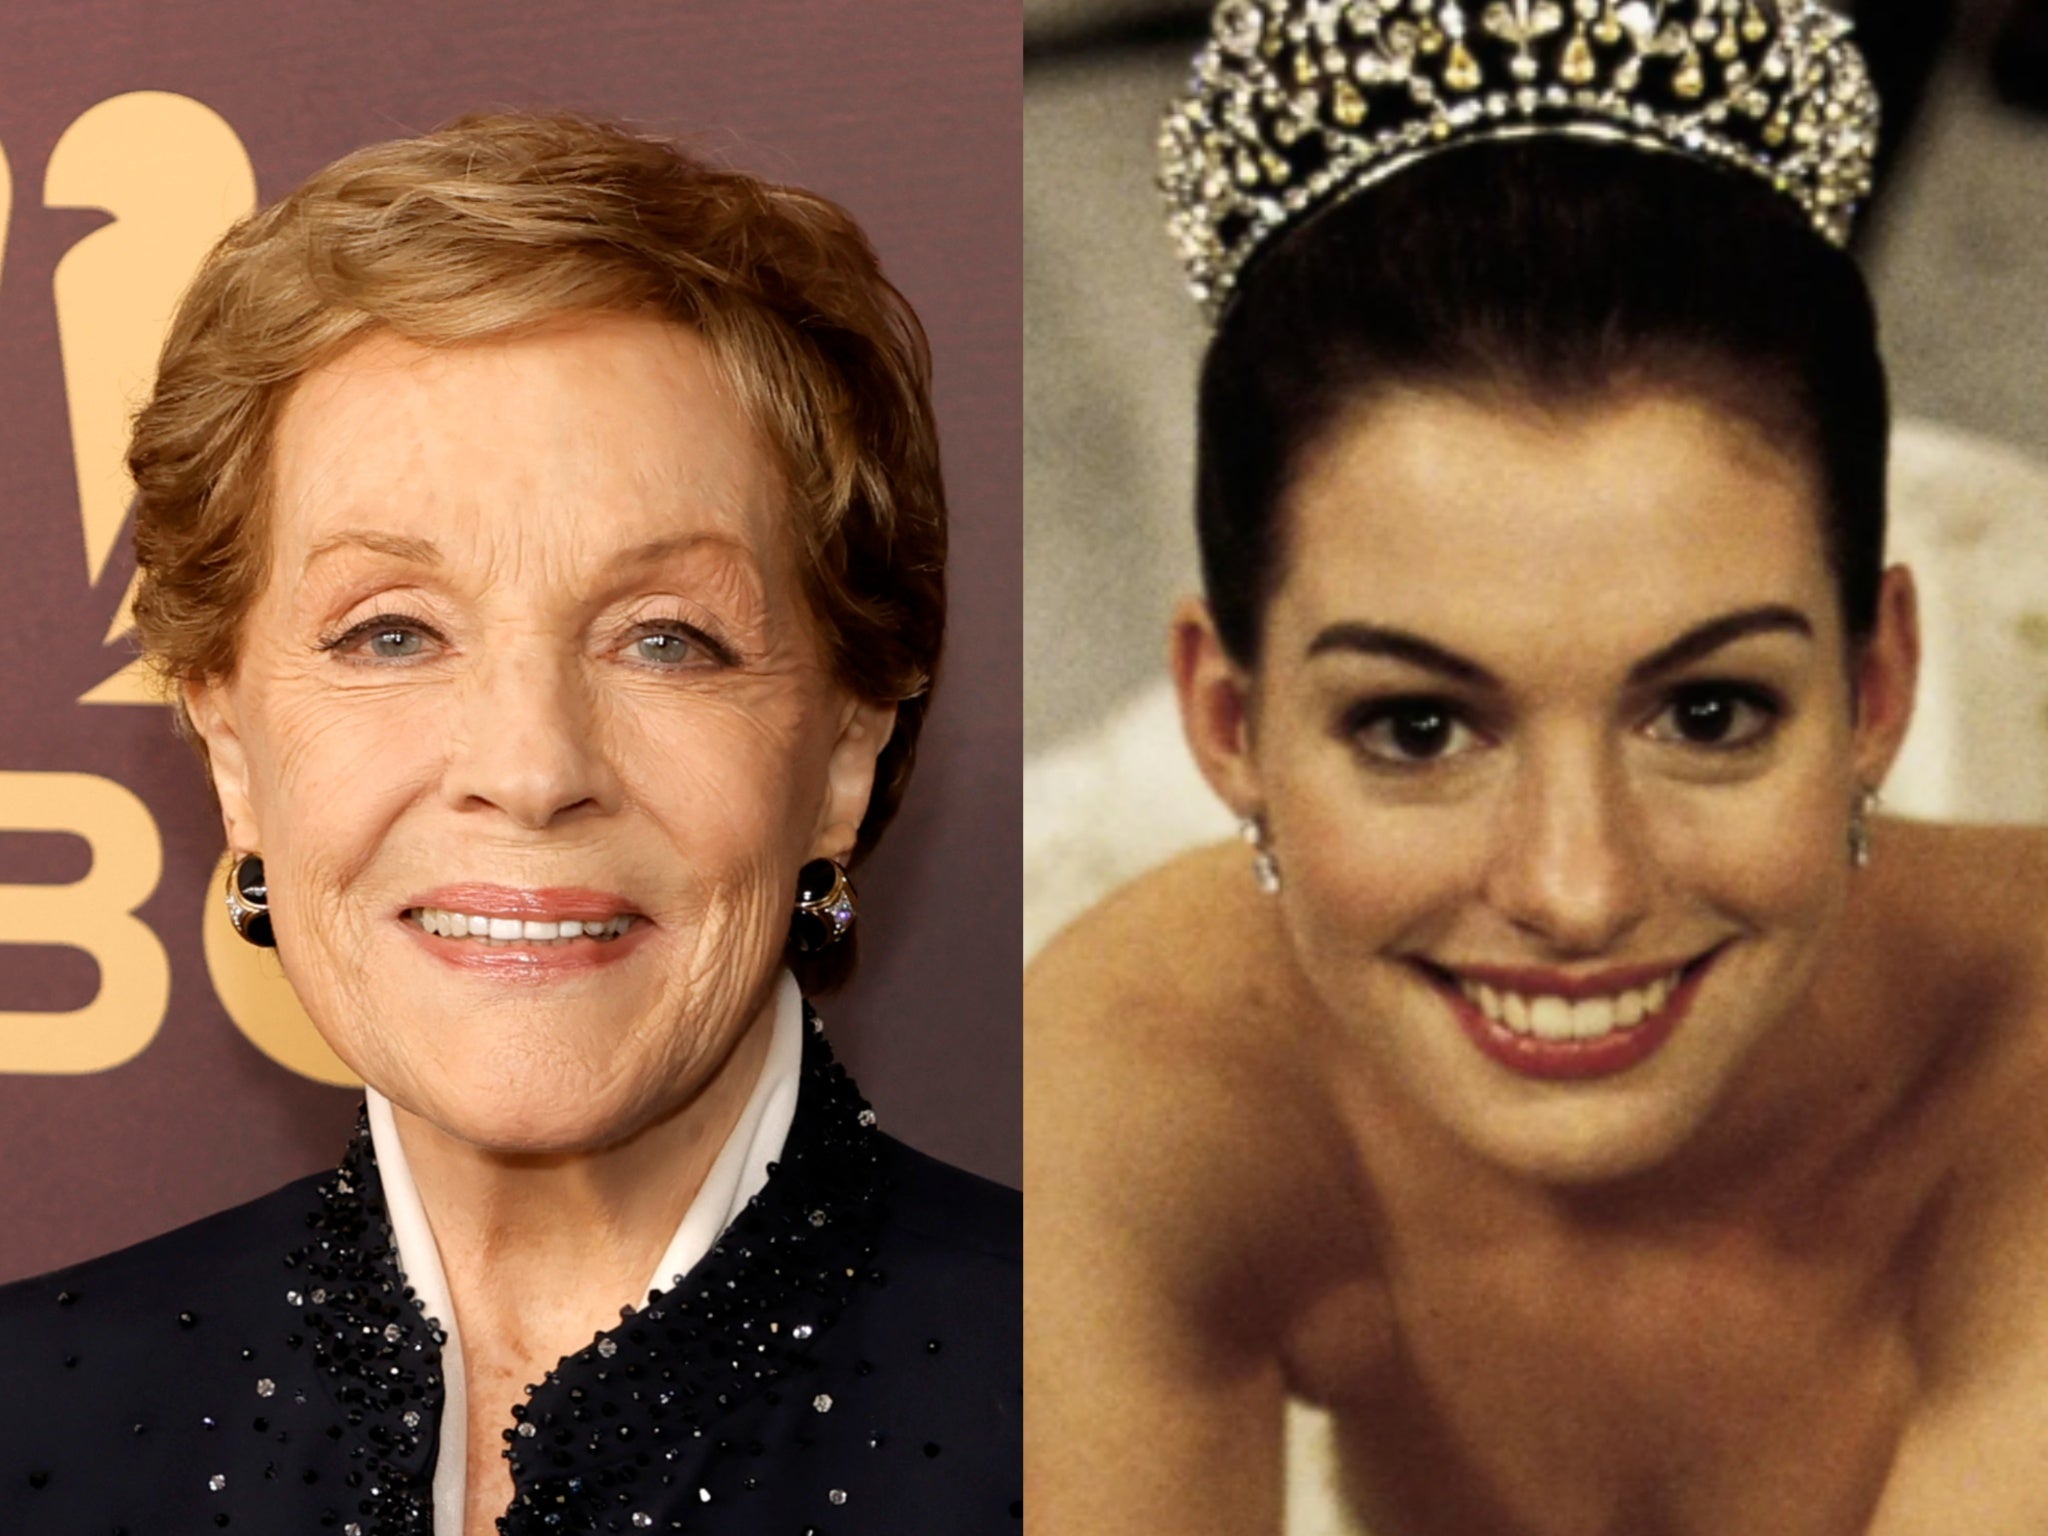 Julie Andrews and Anne Hathaway both starred in the first two Princess Diaries films